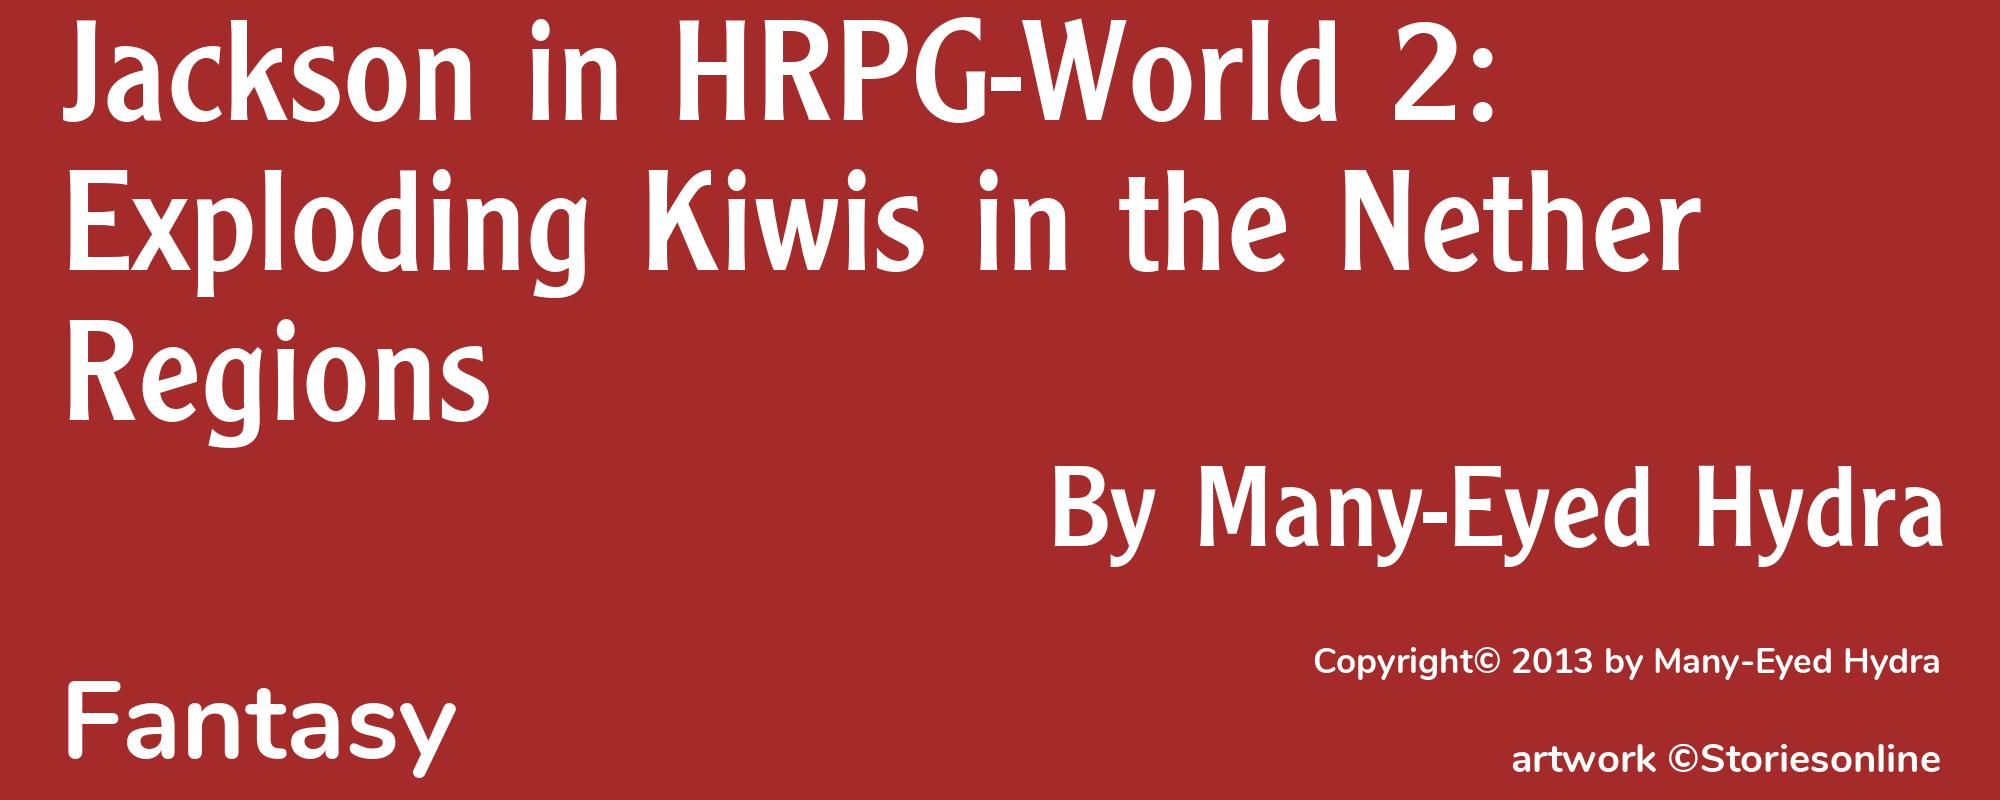 Jackson in HRPG-World 2: Exploding Kiwis in the Nether Regions - Cover